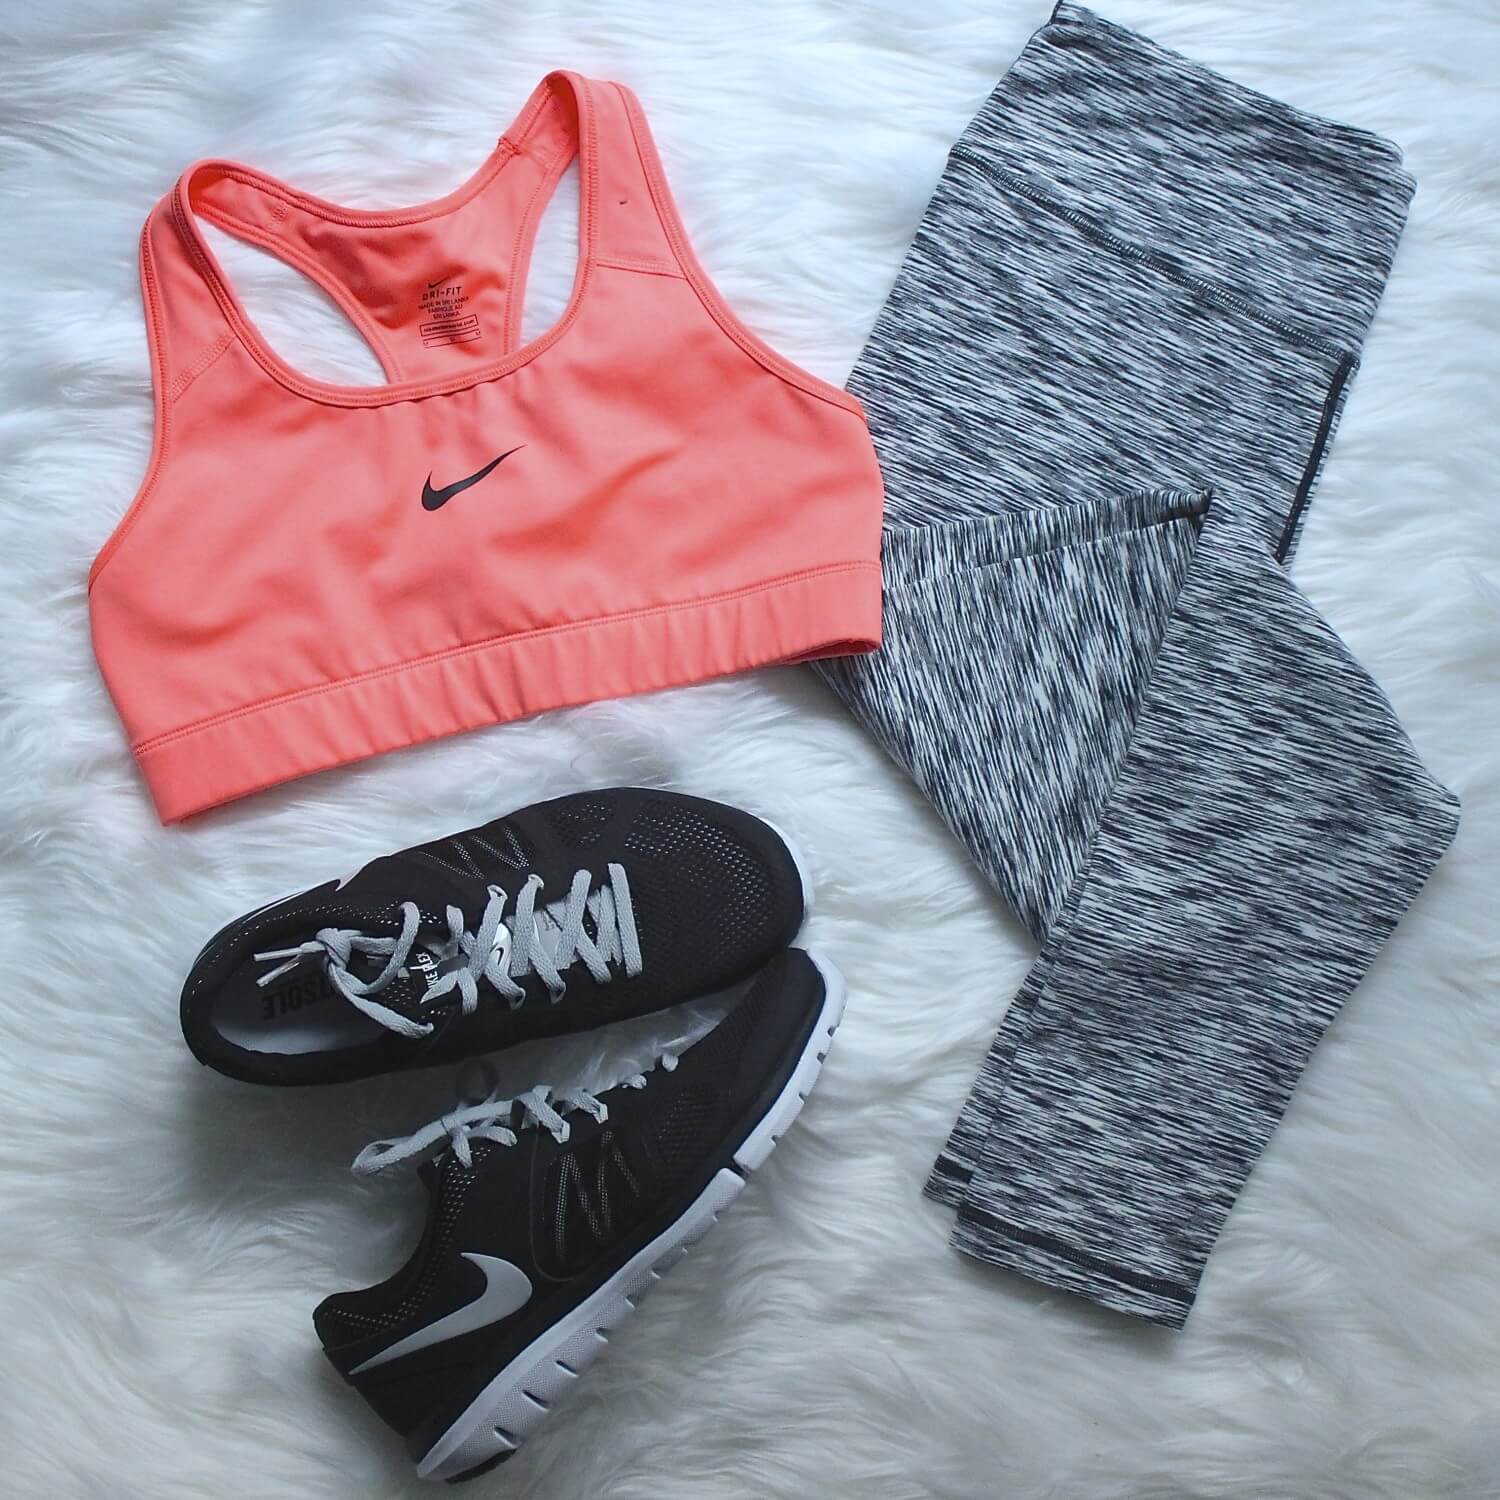 Fitness Fashion Finds - Be a Fit Fashionista on a Budget